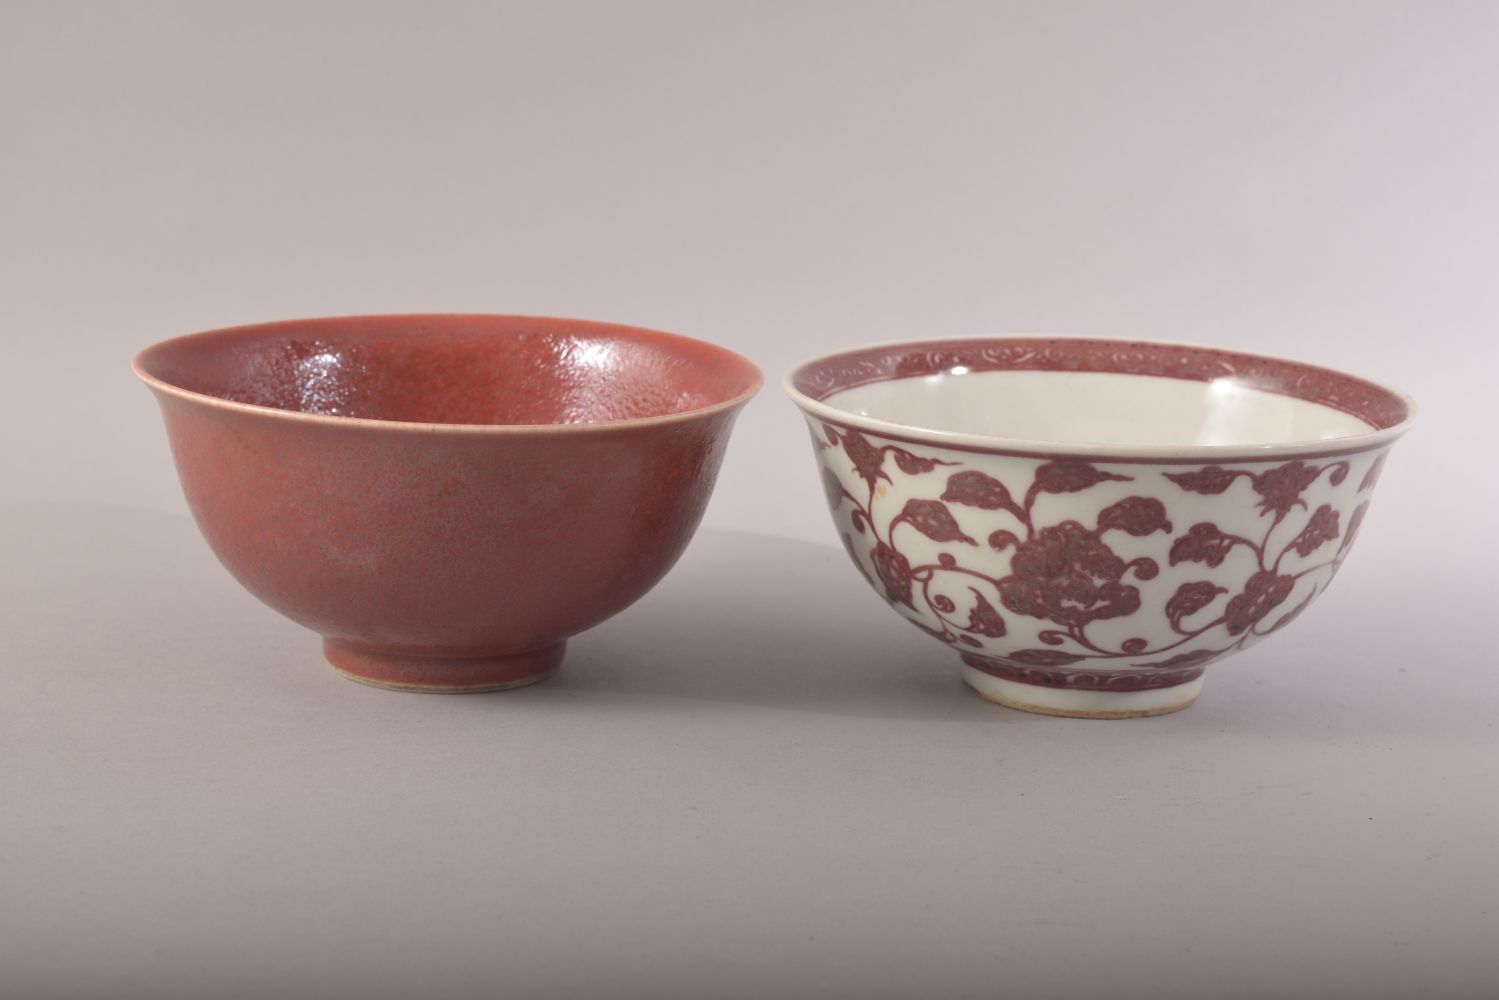 TWO CHINESE PORCELAIN BOWLS, one with red and white floral decoration, the other with red - Image 3 of 7